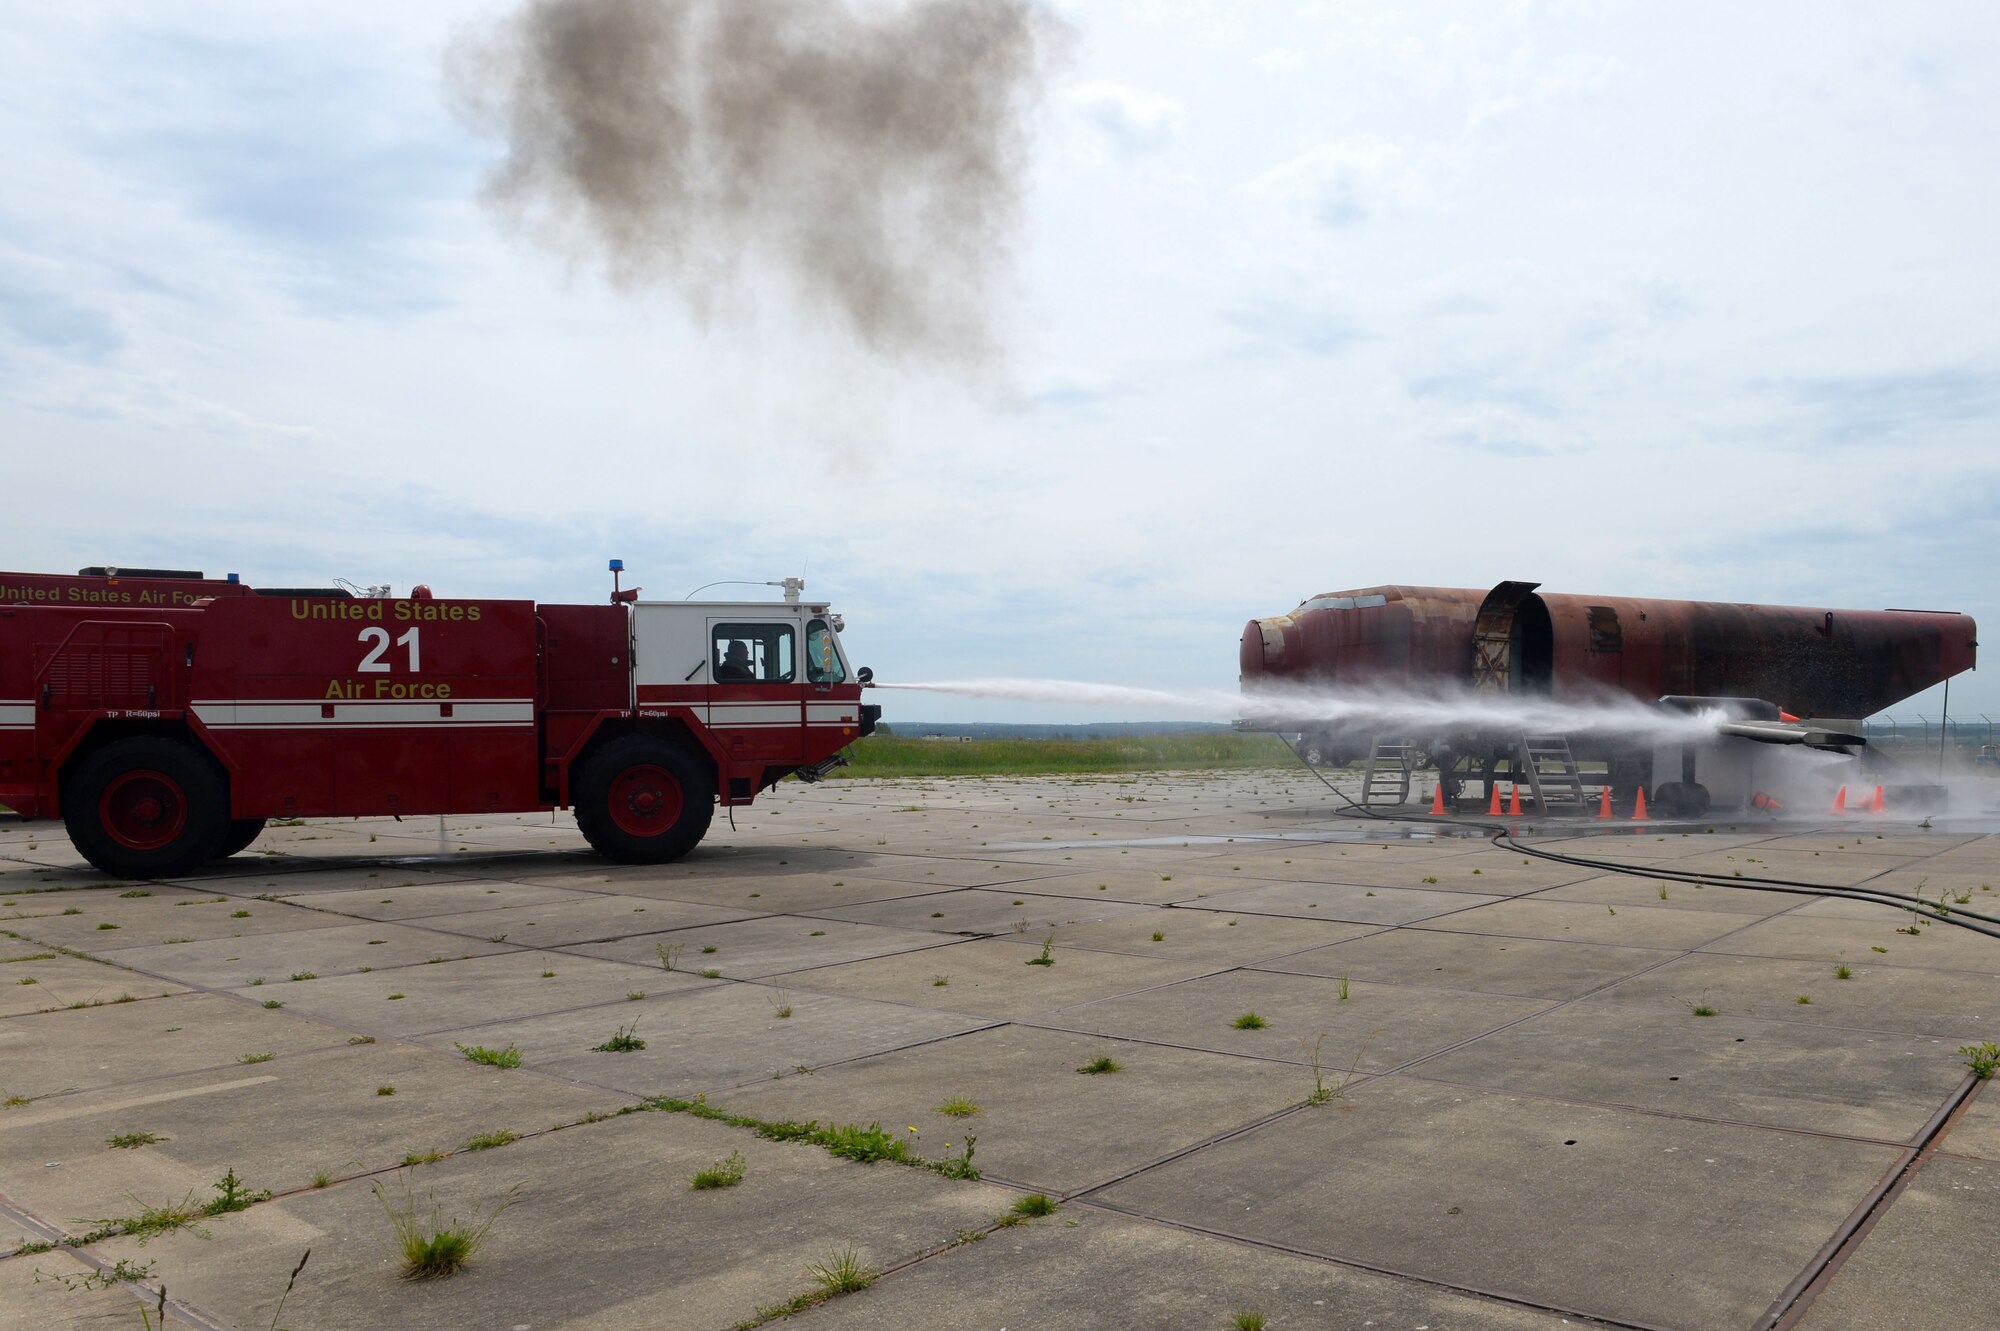 Firefighters from the 52nd Civil Engineer Squadron Fire Emergency Services Flight spray down an aircraft simulator fire during an exercise at Spangdahlem Air Base, Germany, May 21, 2014. These Airmen exercise different fire emergency situations every day to keep their skills sharp. (U.S. Air Force photo by Senior Airman Alexis Siekert/Released)